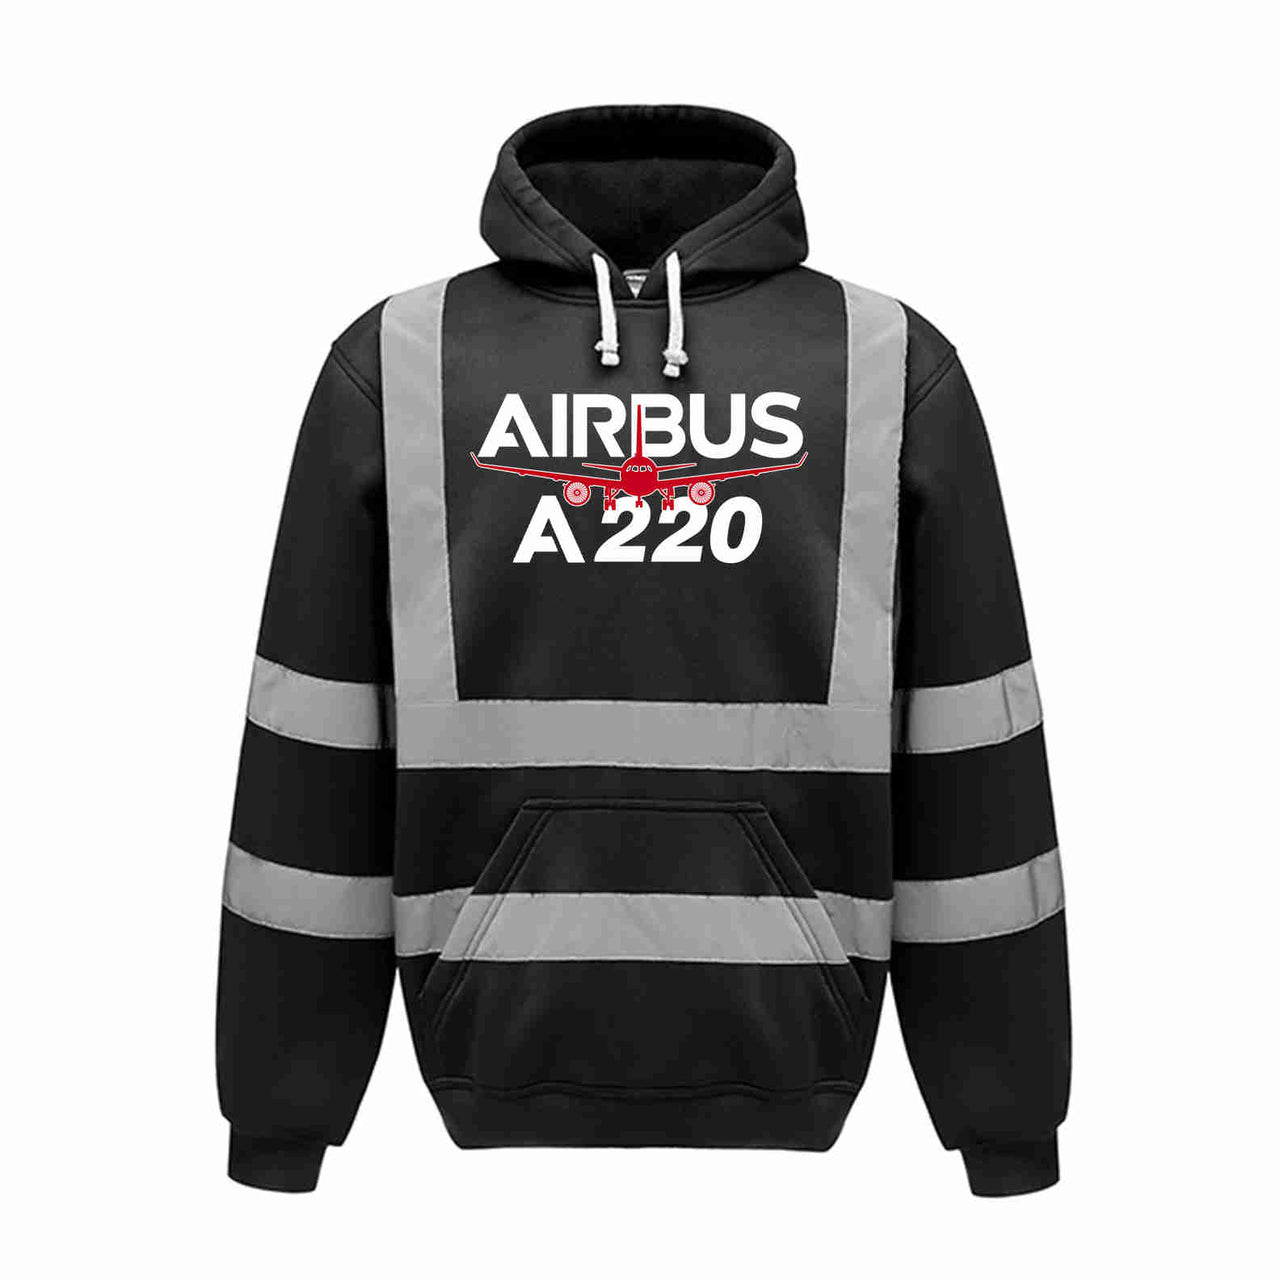 Amazing Airbus A220 Designed Reflective Hoodies